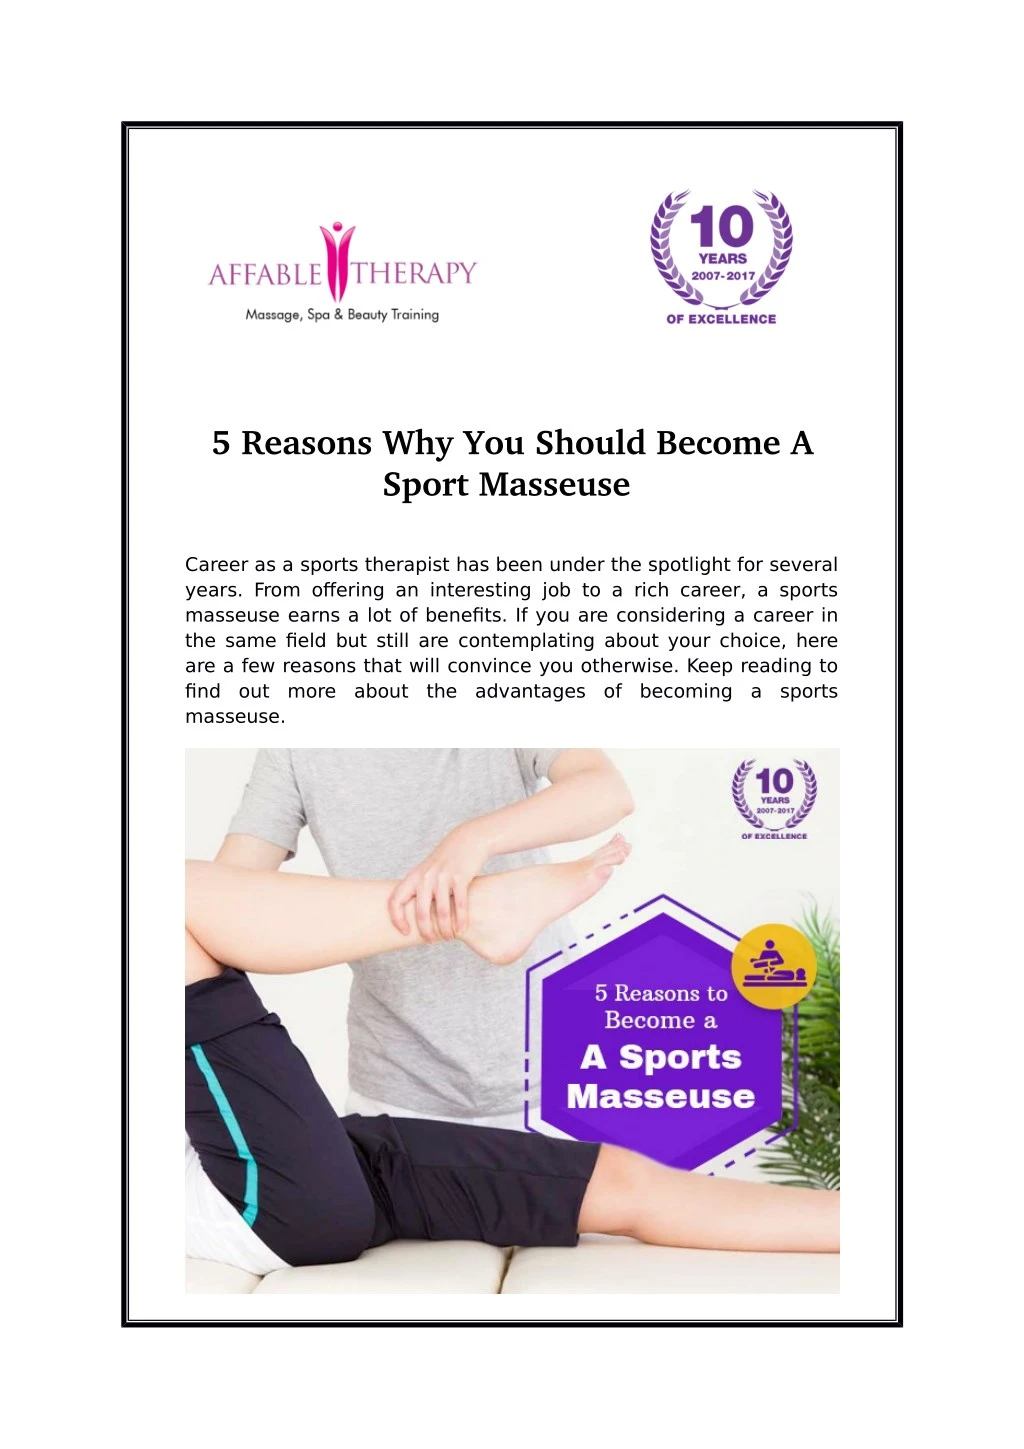 5 reasons why you should become a sport masseuse